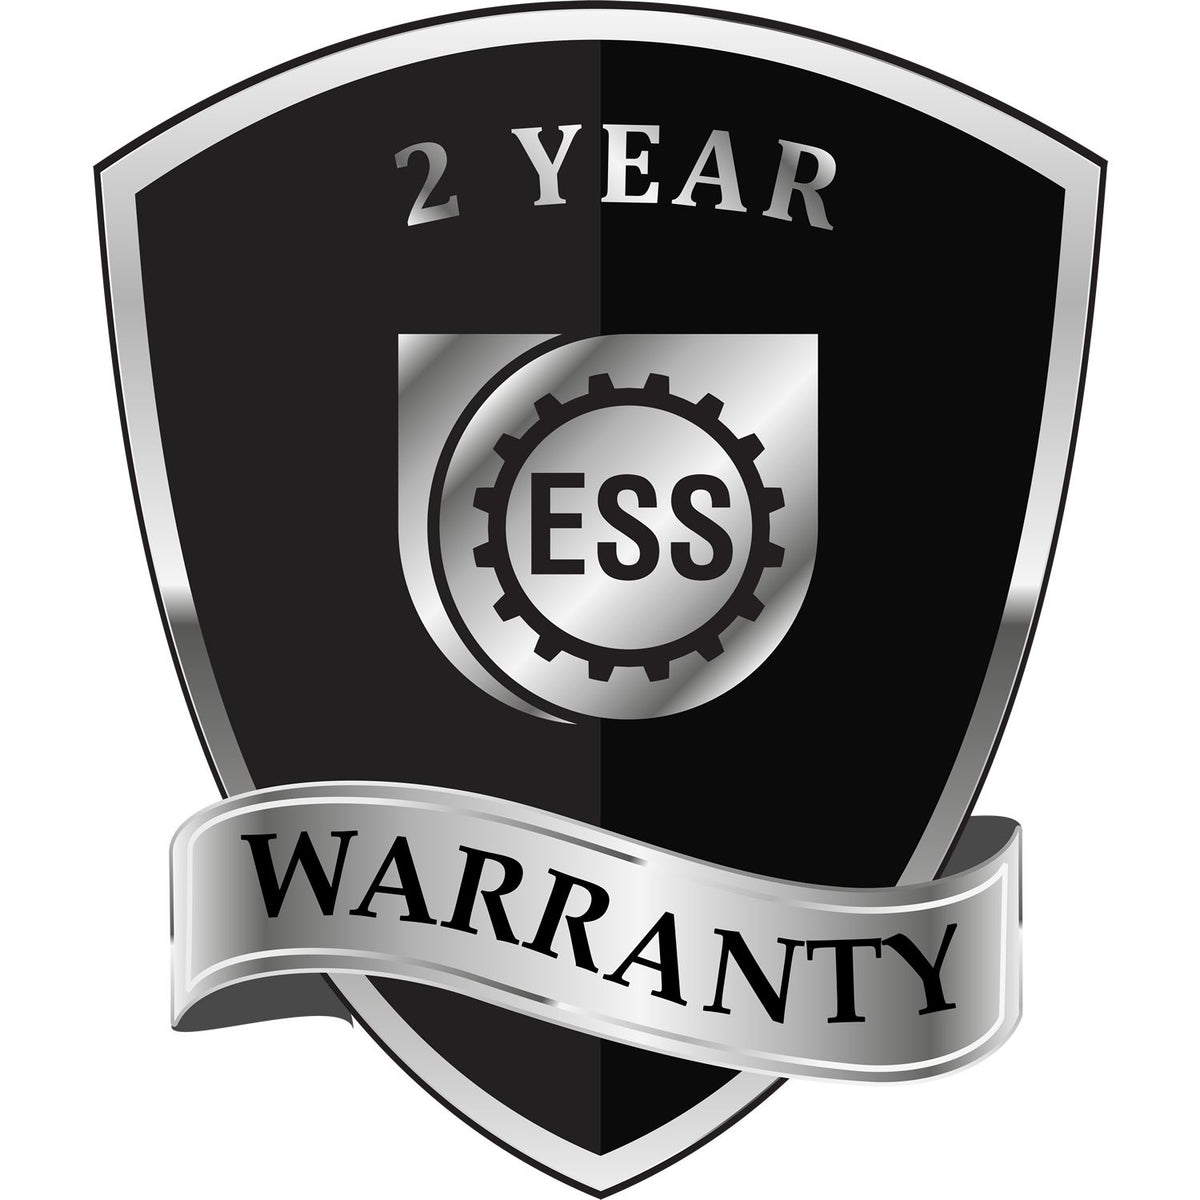 A black and silver badge or emblem showing warranty information for the Hybrid New Jersey Landscape Architect Seal